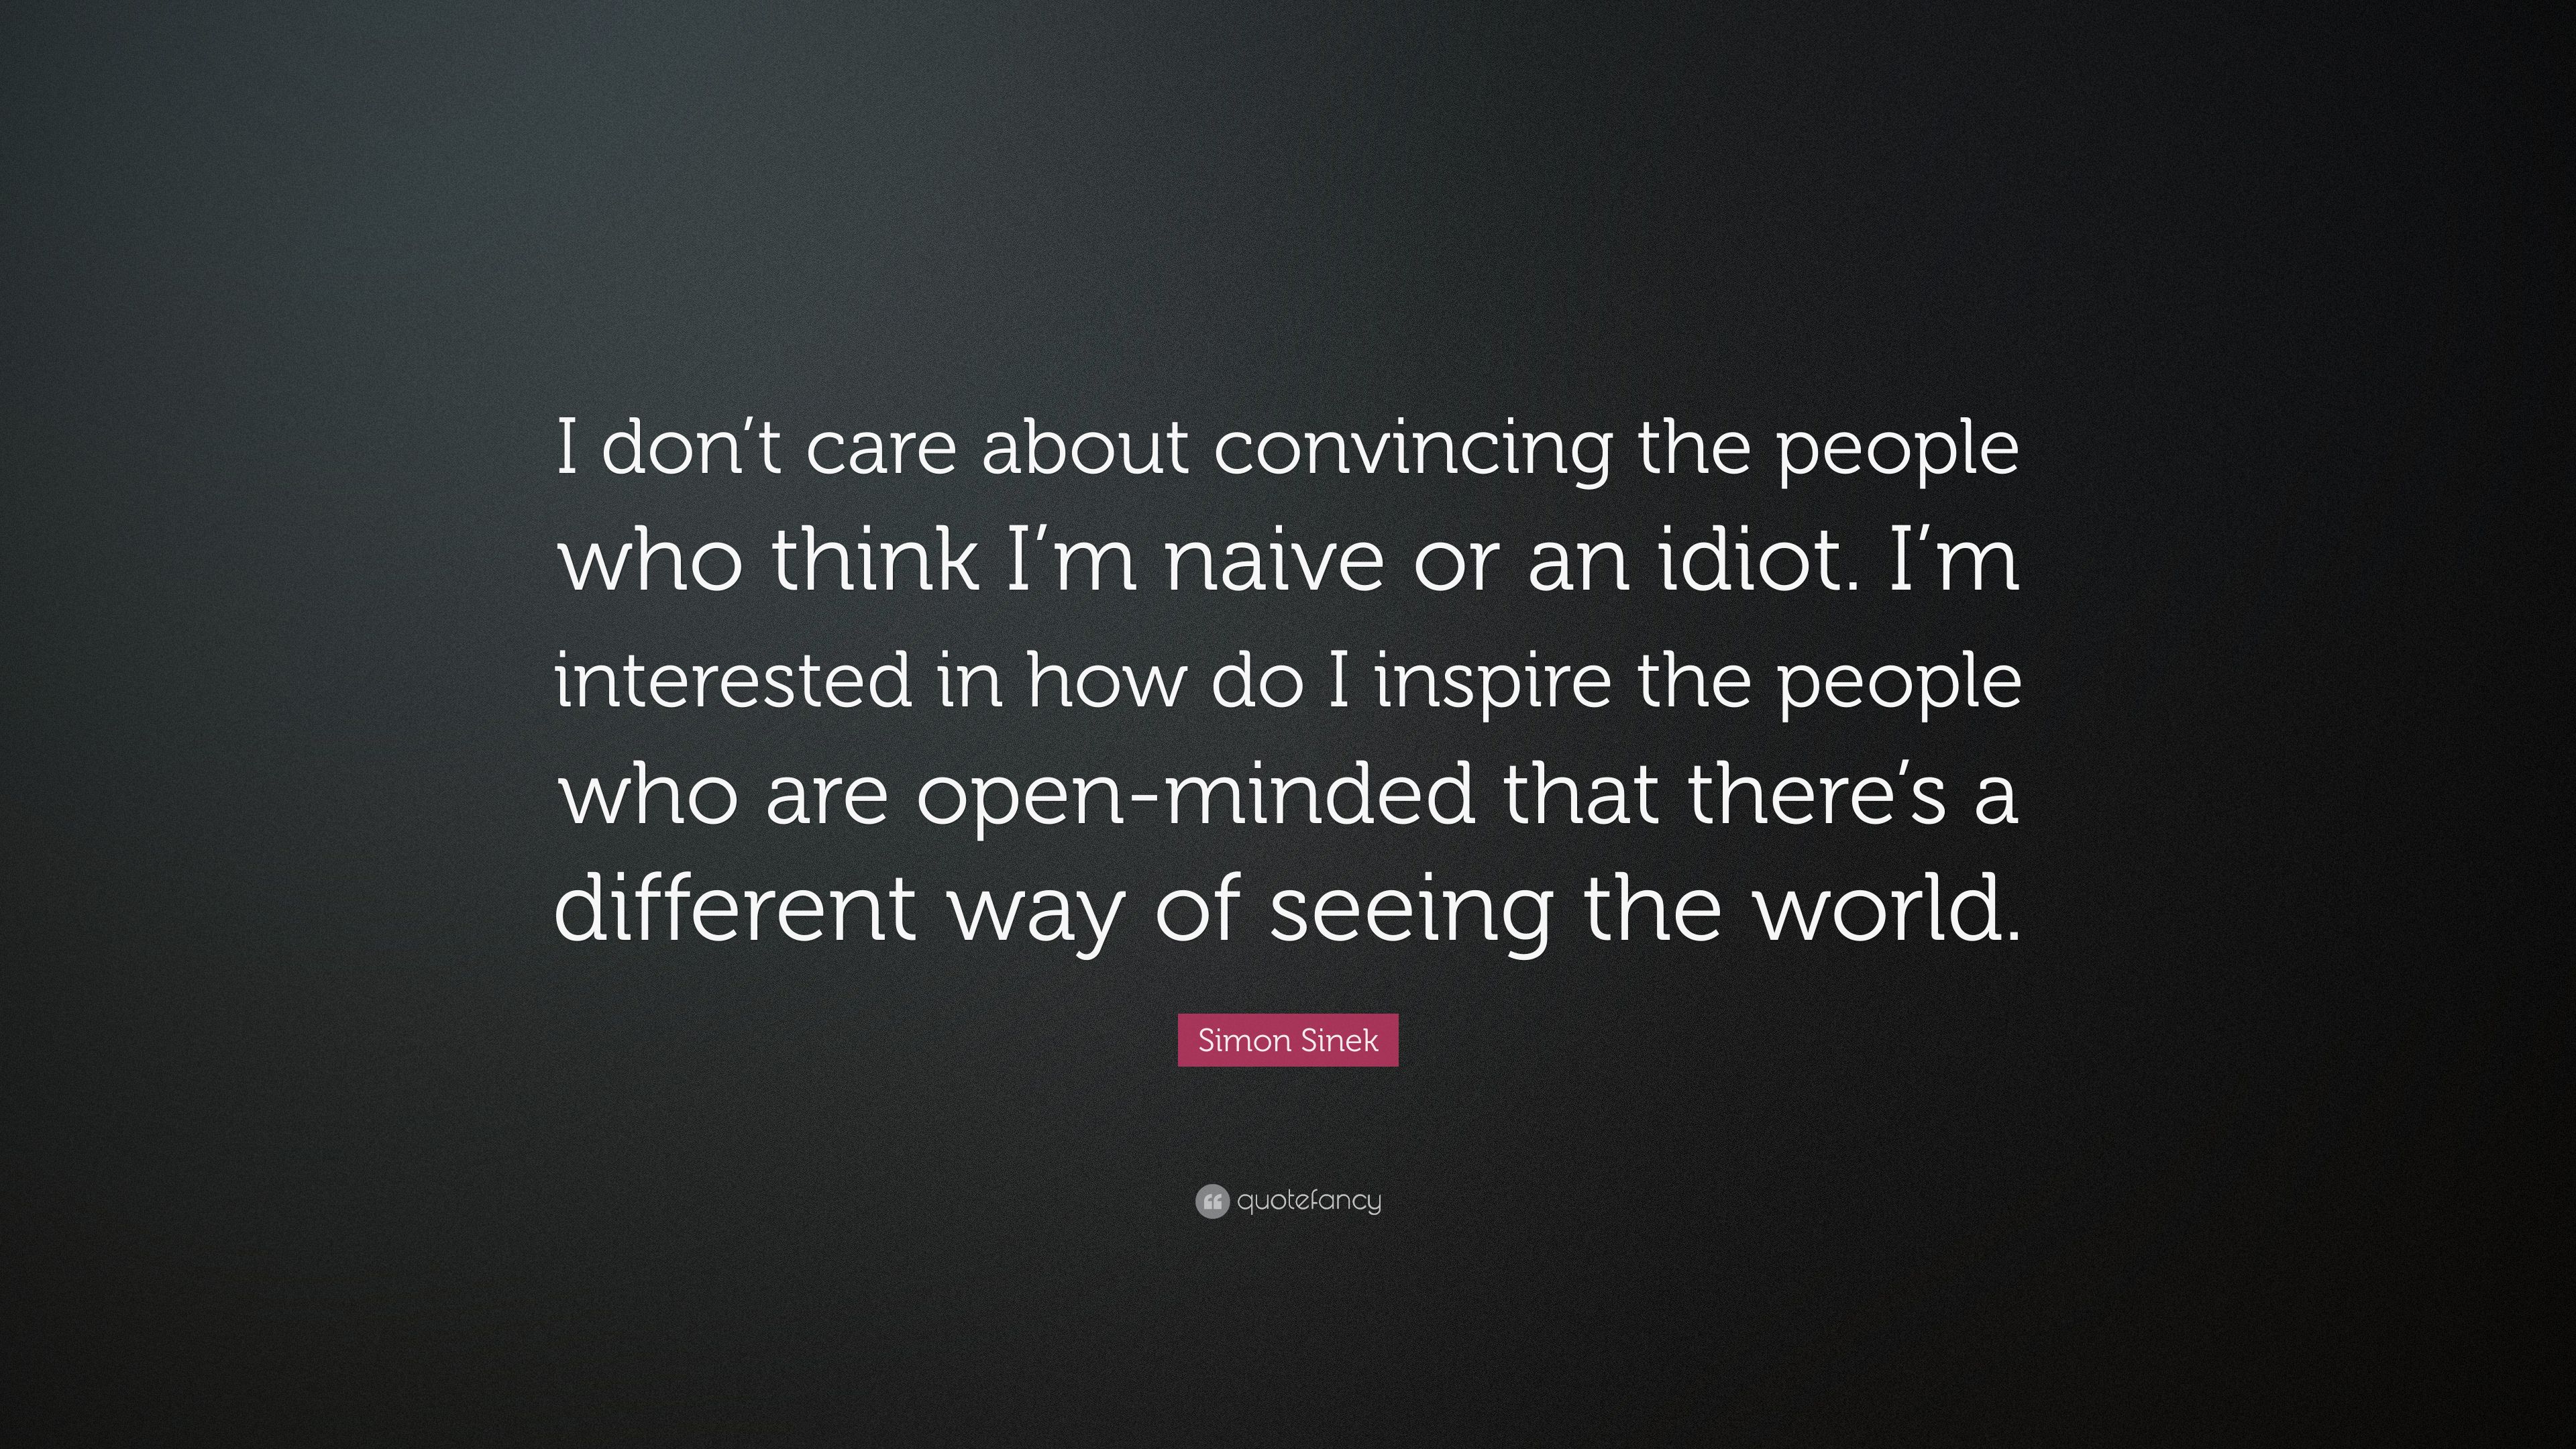 Simon Sinek Quote: “I don't care about convincing the people who